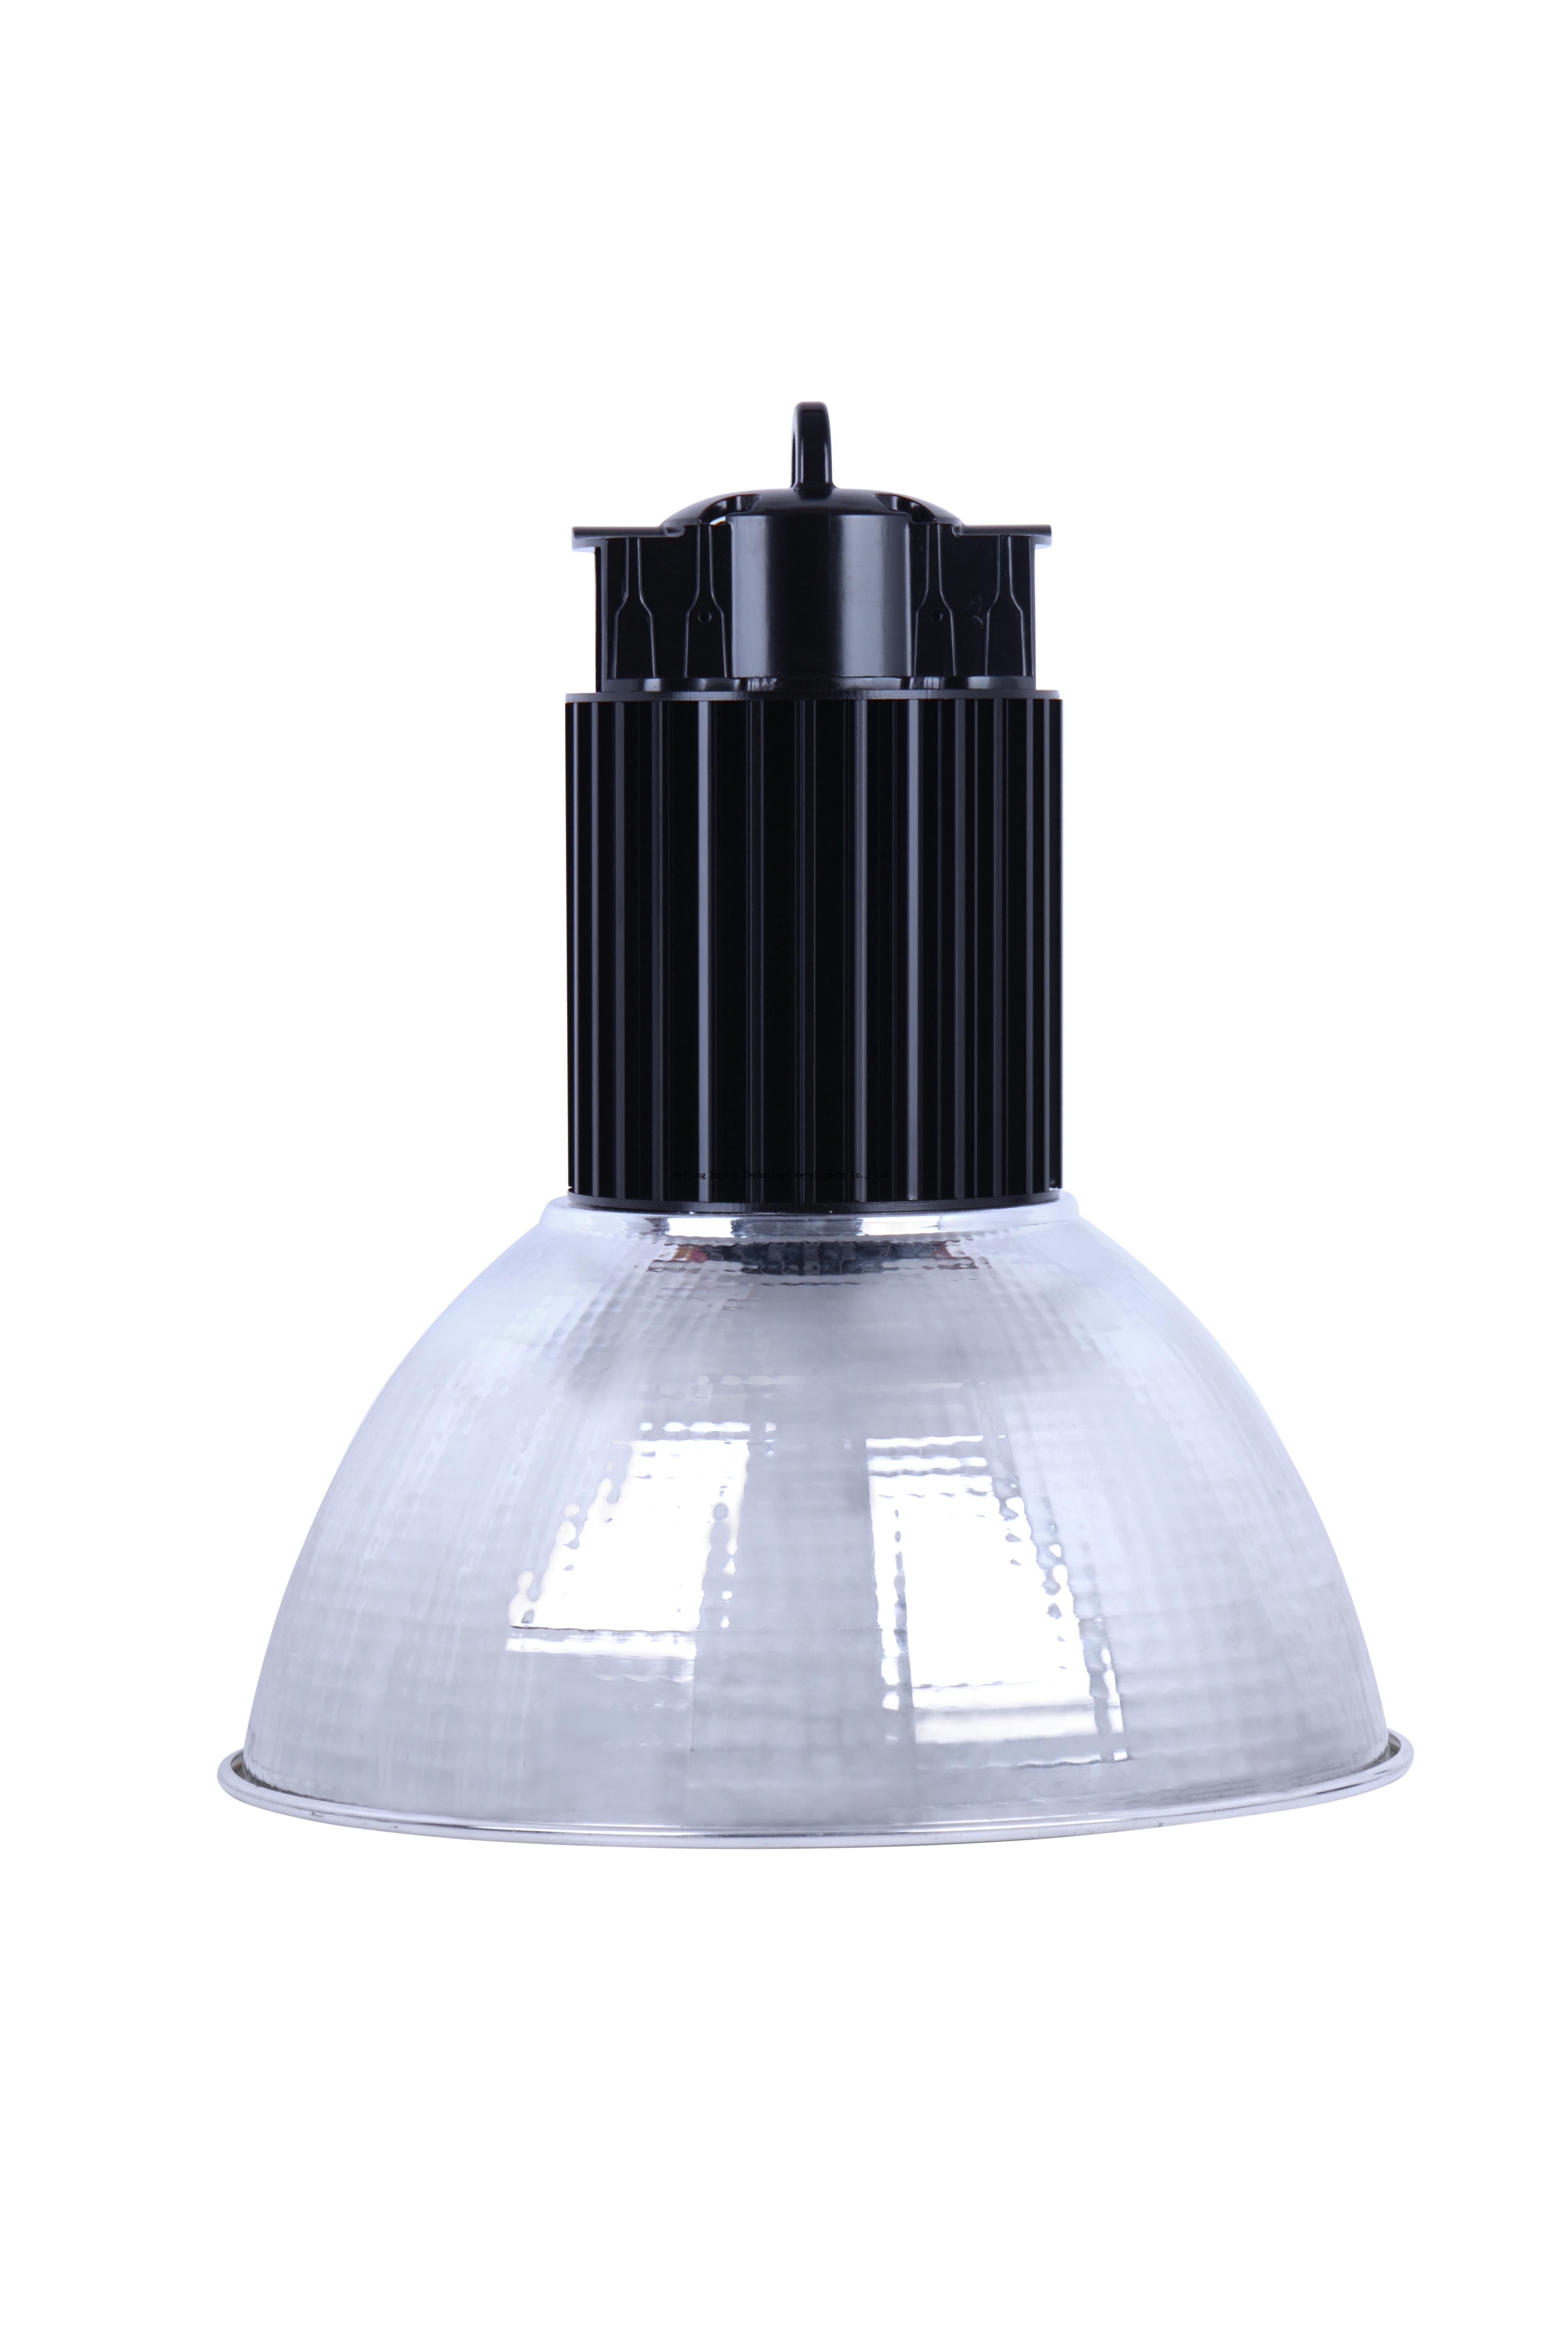 High quality LED high bay light with 80W Power 